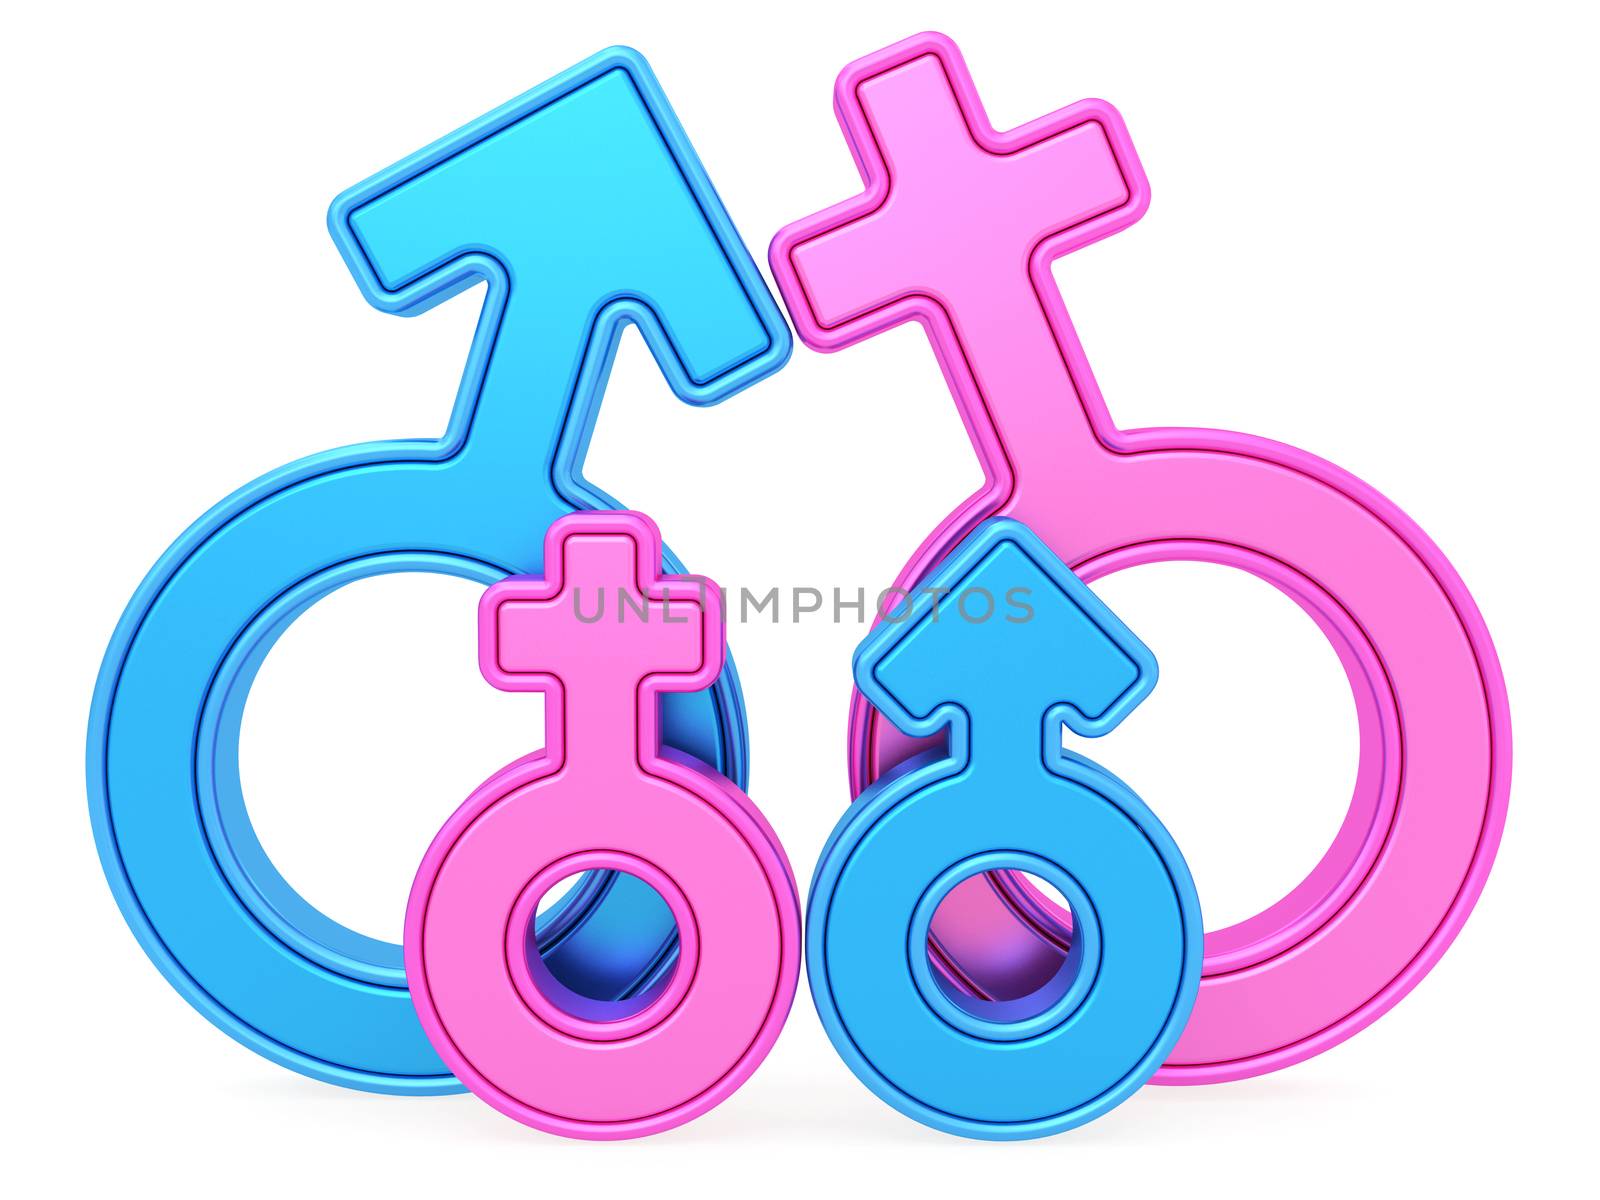 Parents with children of male and female gender signs by oneo